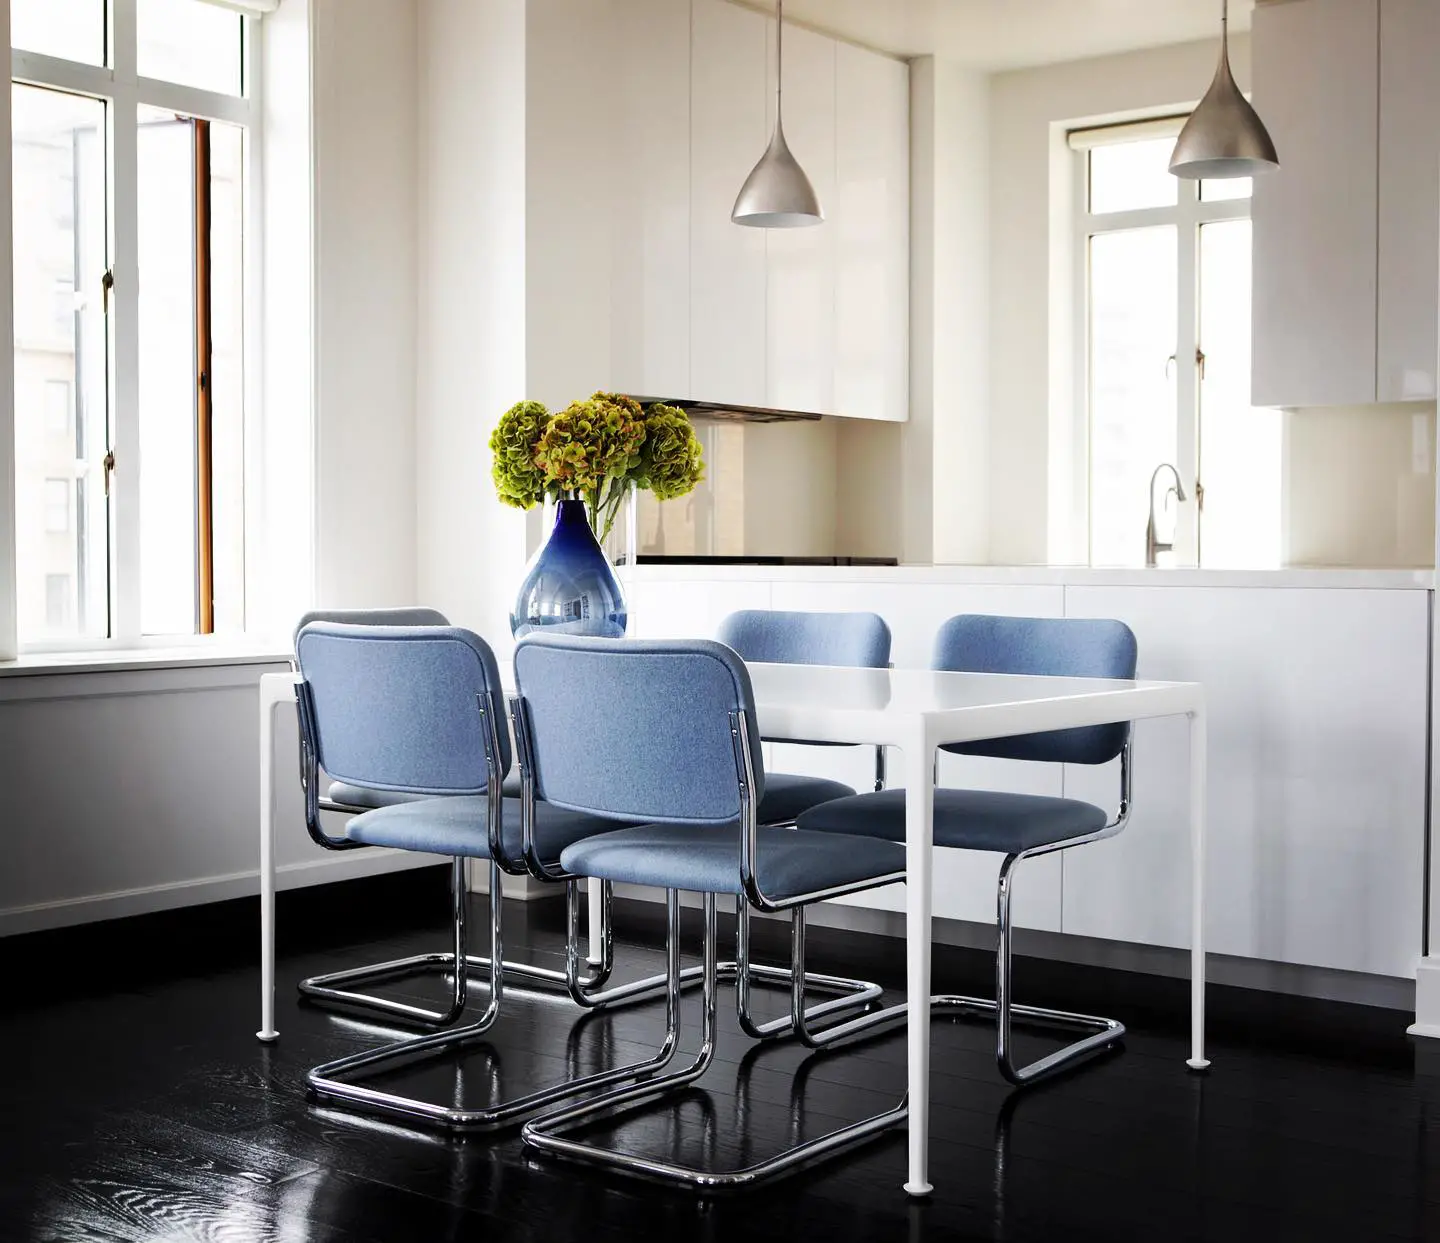 A white kitchen with blue chairs and a black kitchen floor.